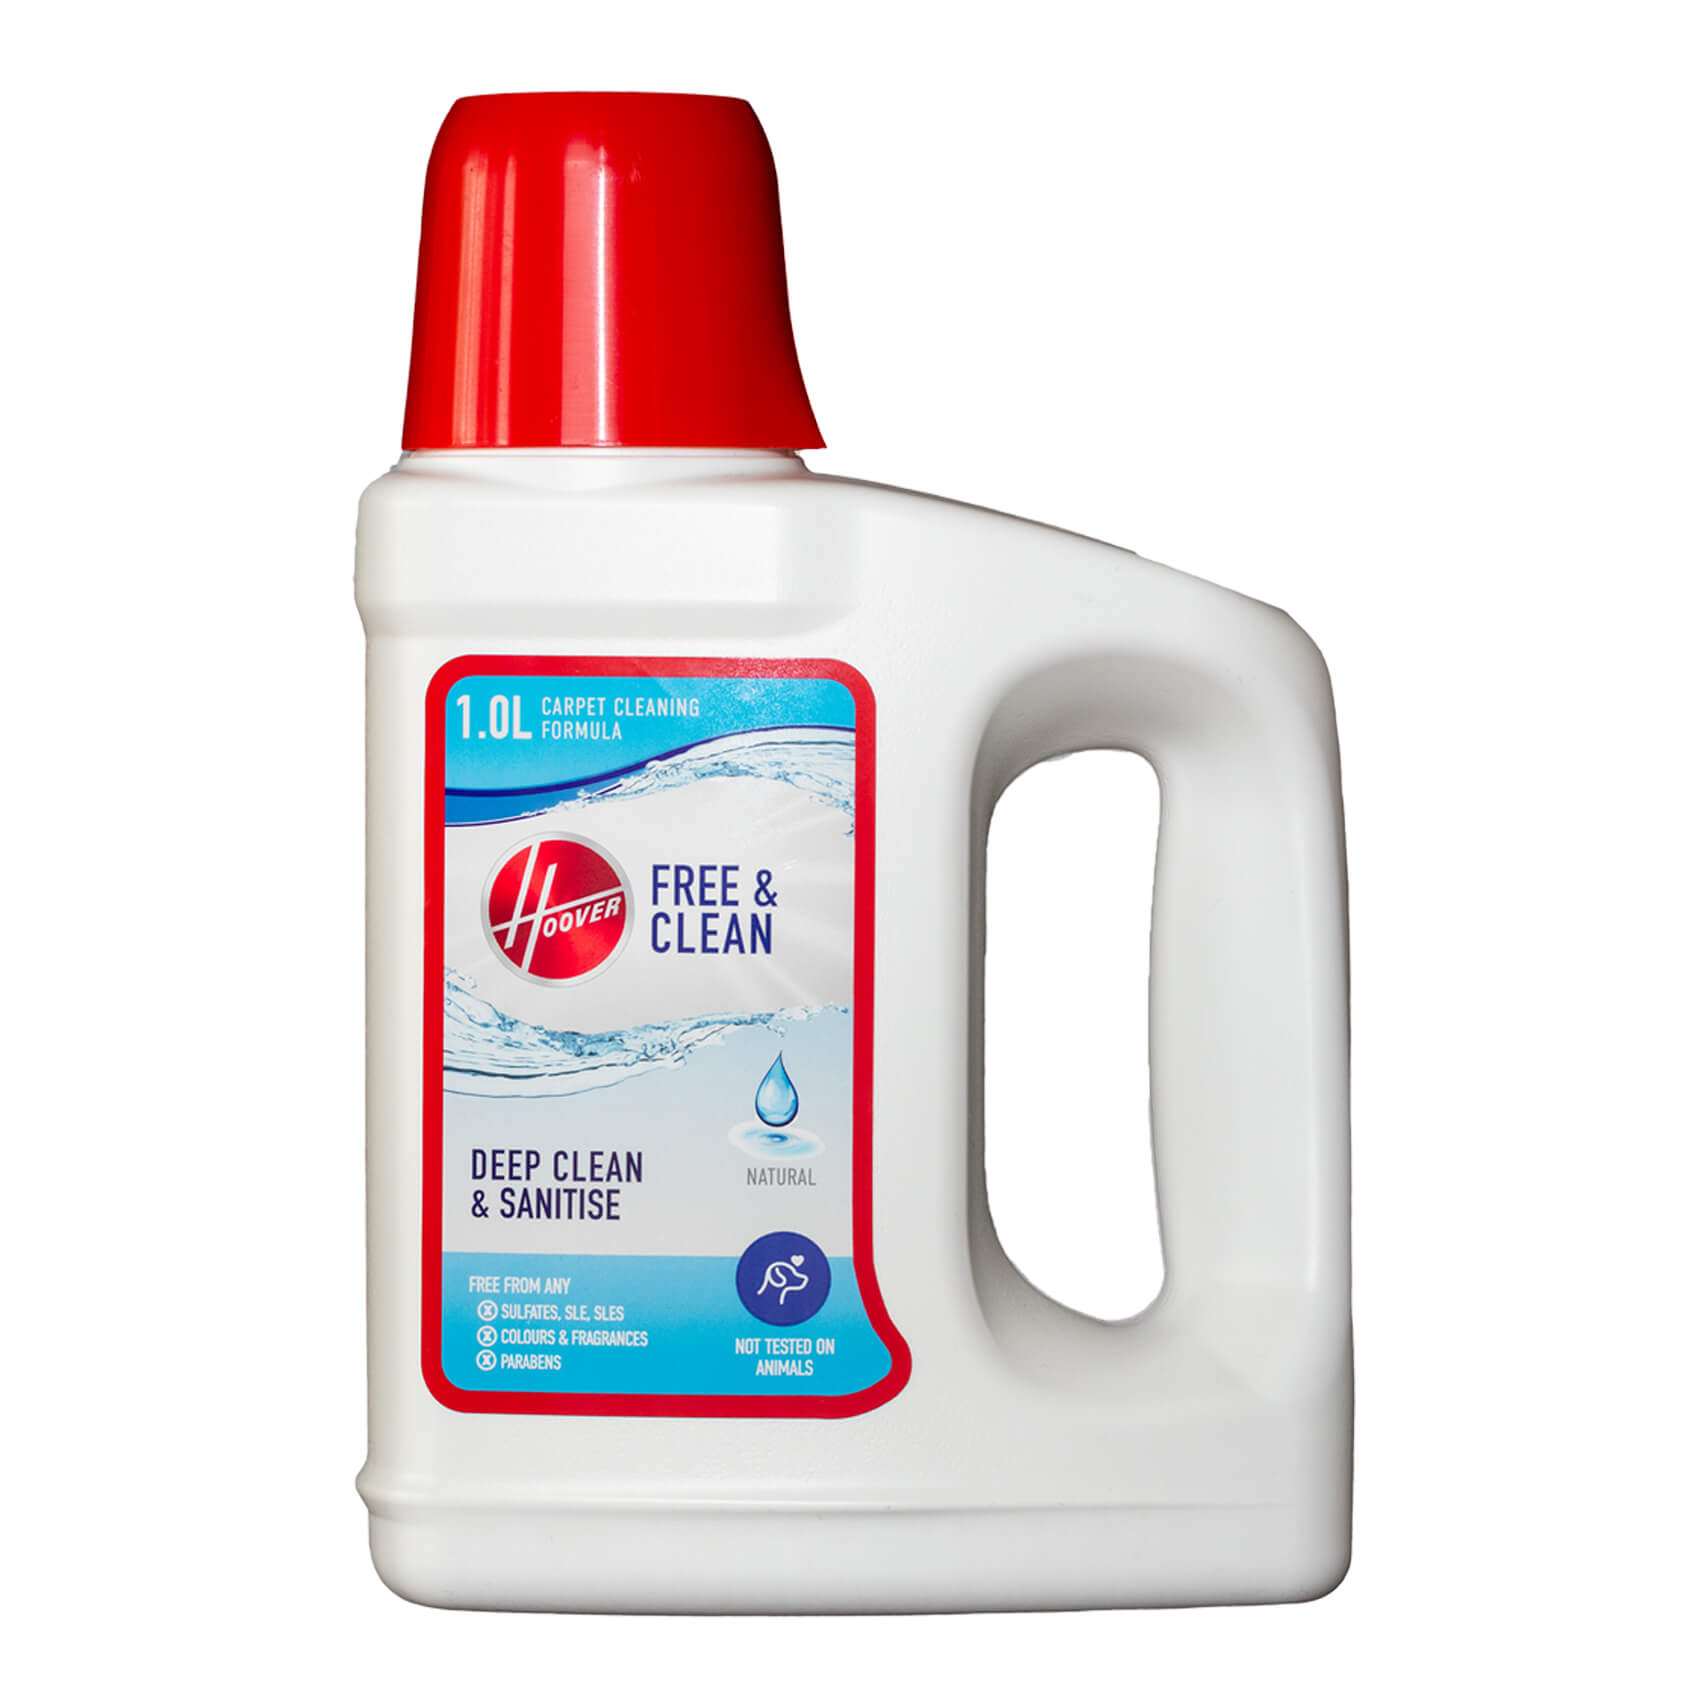 Hoover Free & Clean Cleaning Solution 1L